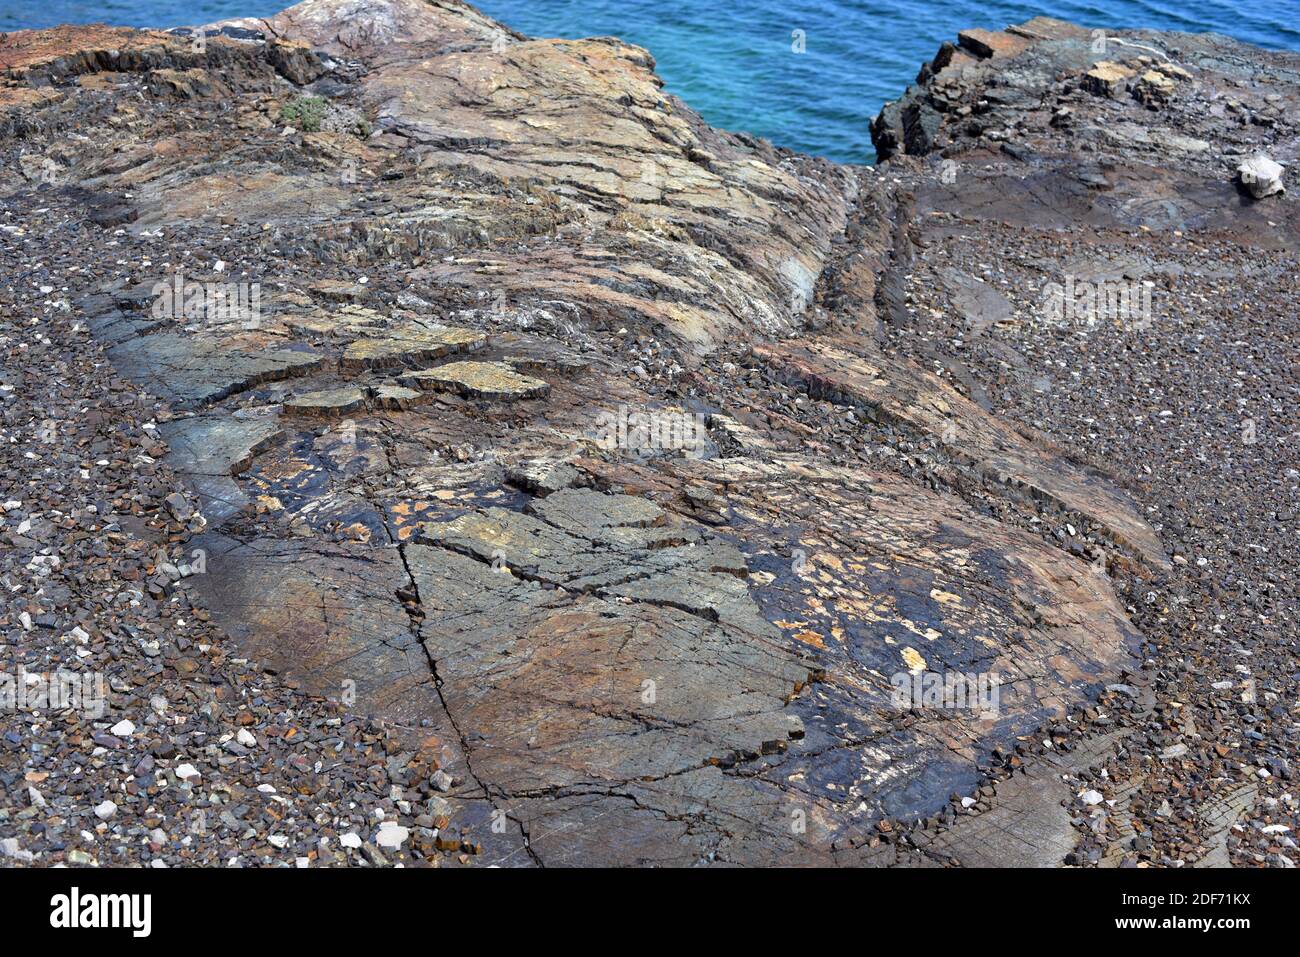 Fault plane is the fracture surface of fault. This photo was taken in Cala Mica, Menorca Island, Balearic Islands, Spain. Stock Photo